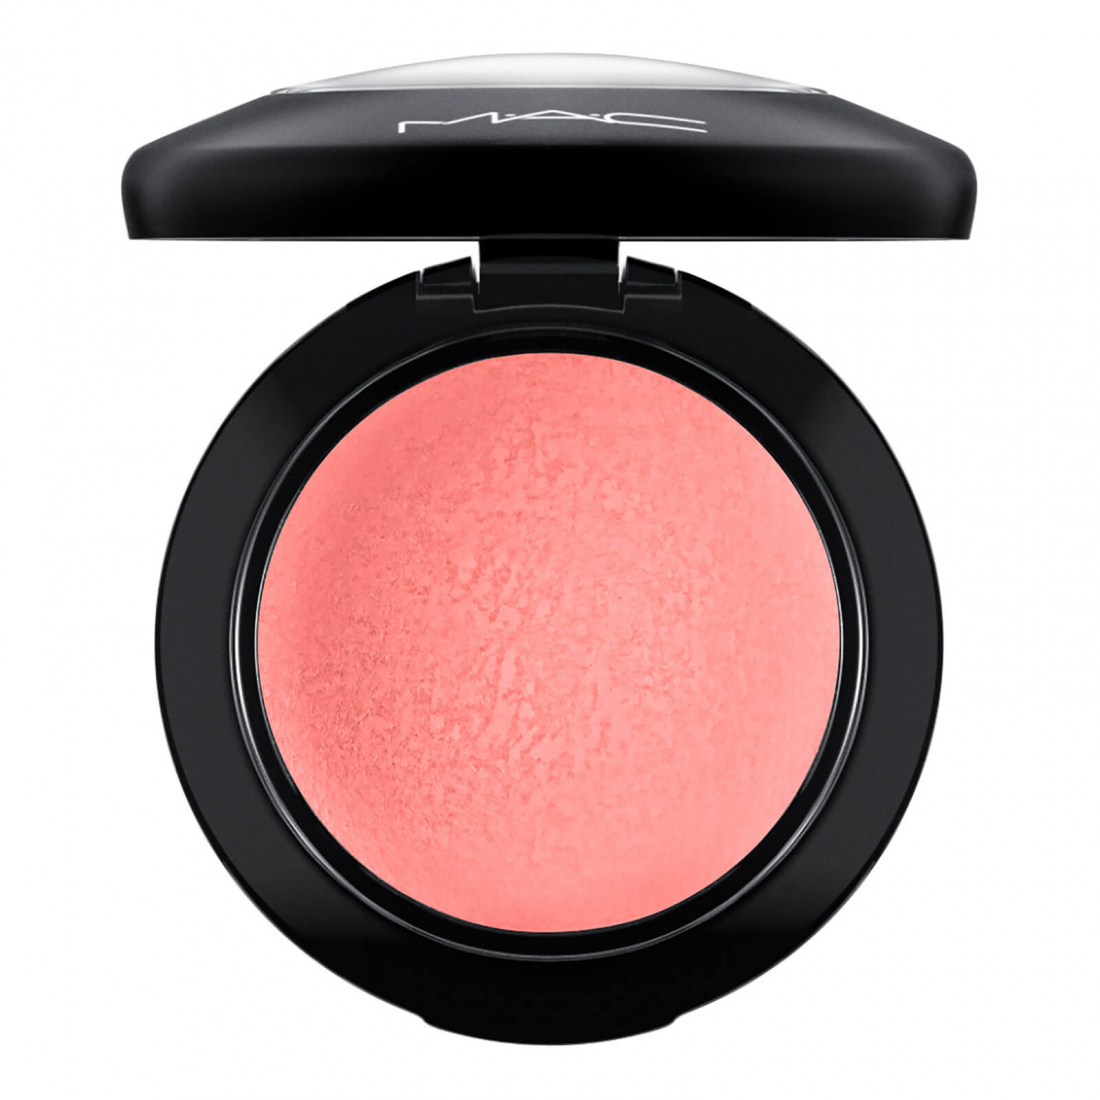 'Mineralize' Blush - Hey, Coral, Hey 3.2 g